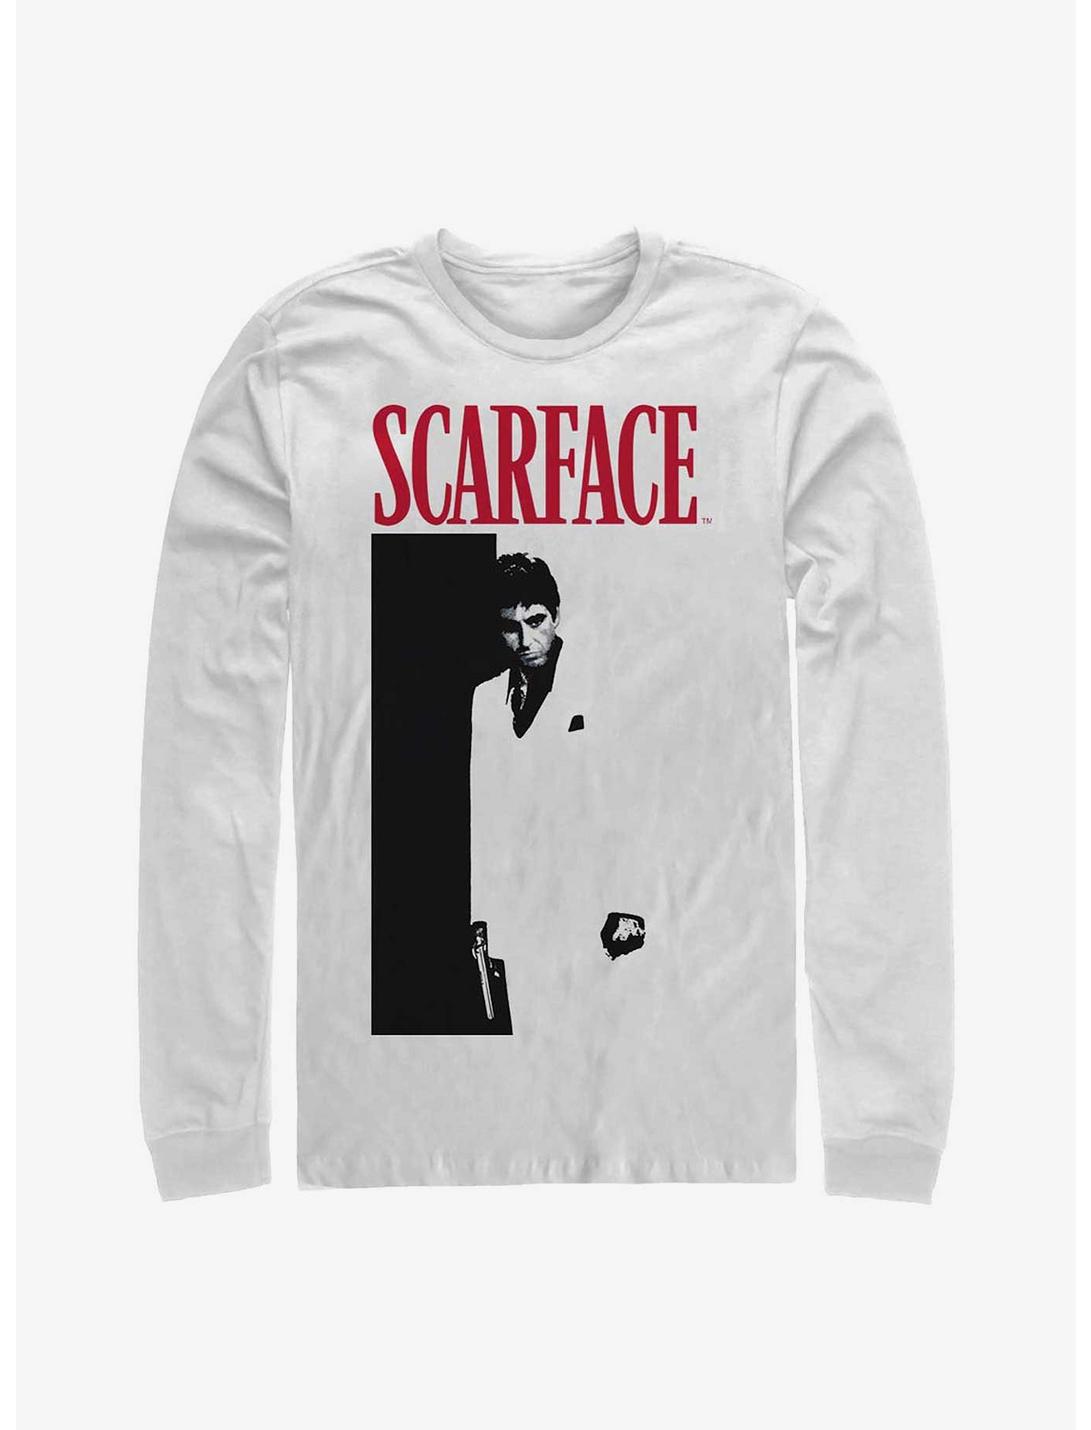 Scarface Classic Poster Long-Sleeve T-Shirt, WHITE, hi-res